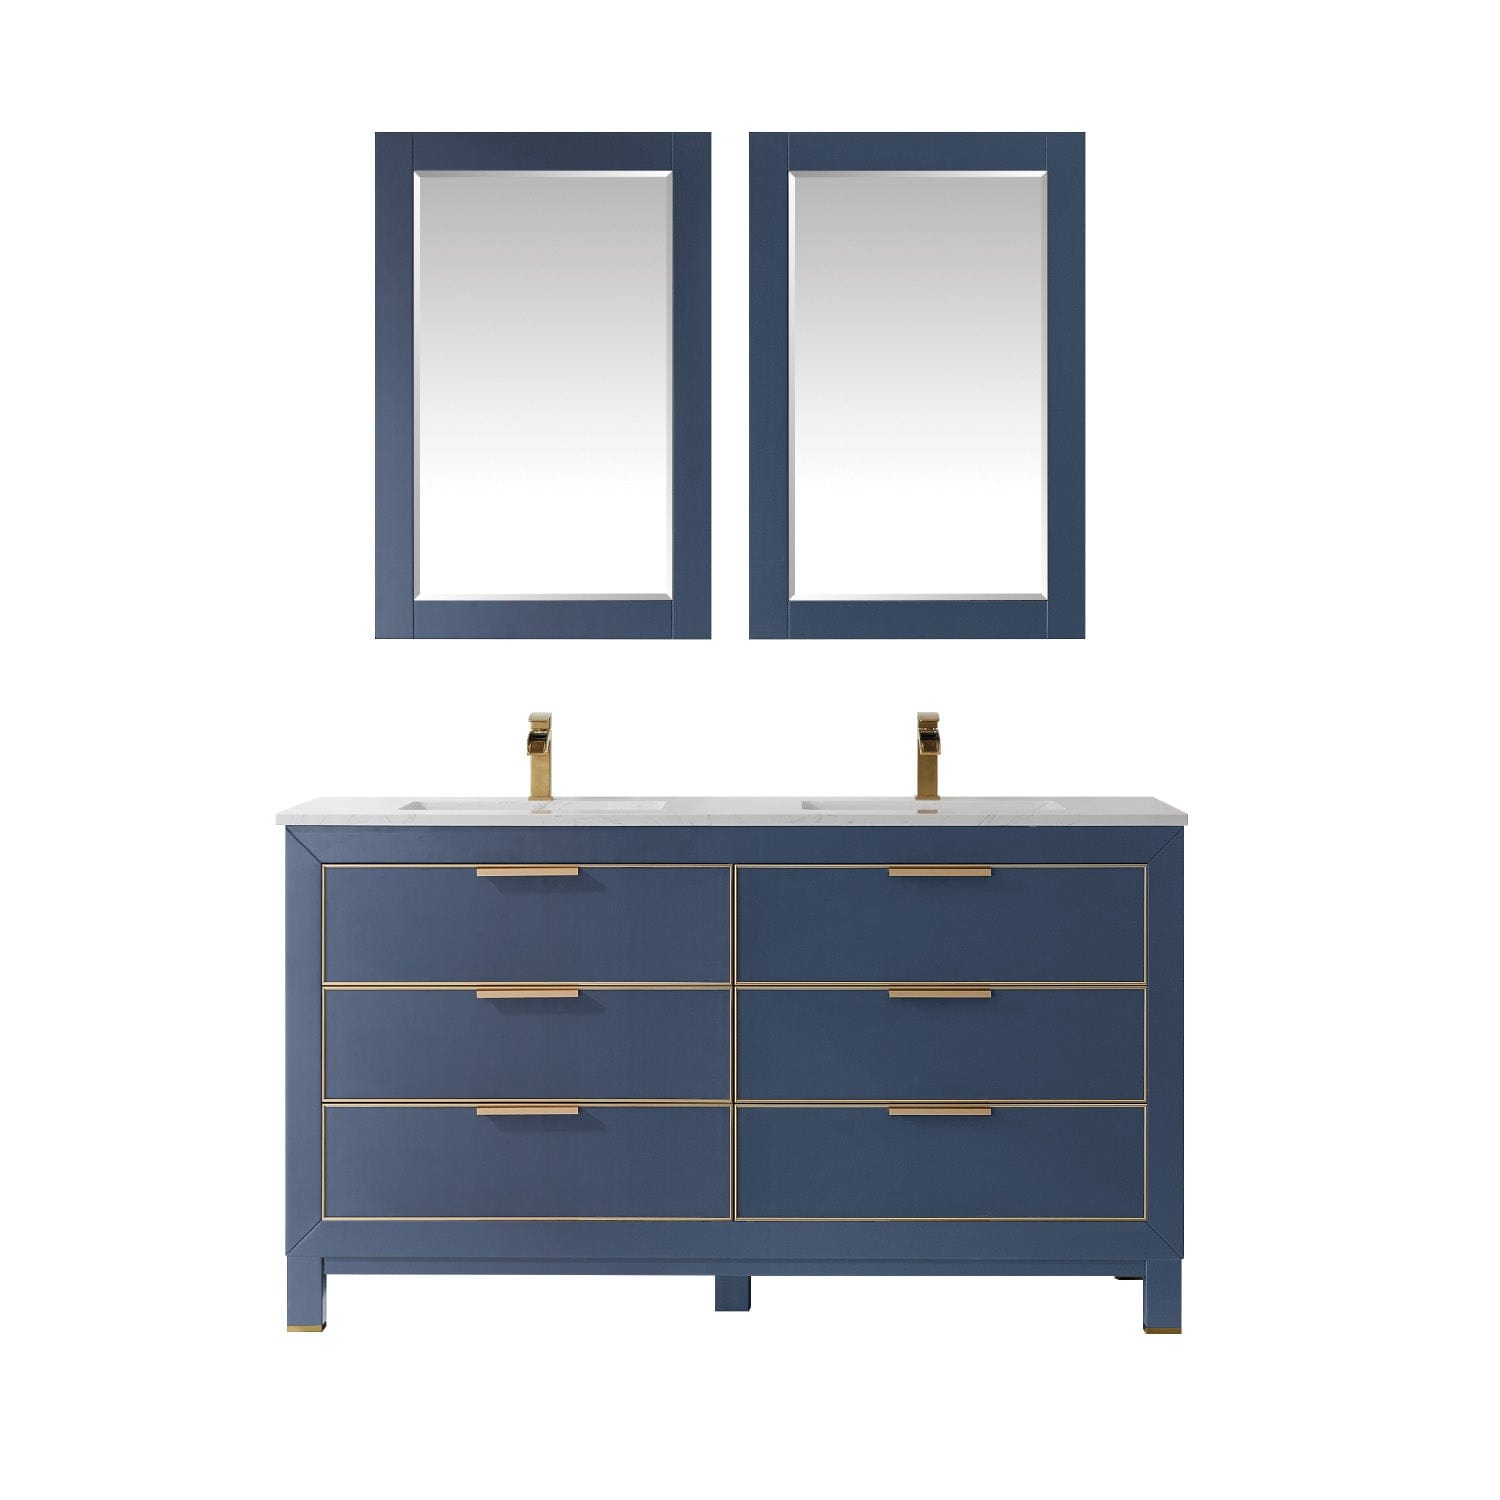 Altair Jackson 60" Double Bathroom Vanity Set in Royal Blue and Composite Carrara White Stone Countertop with Mirror 533060-RB-AW - Molaix631112971652Vanity533060-RB-AW